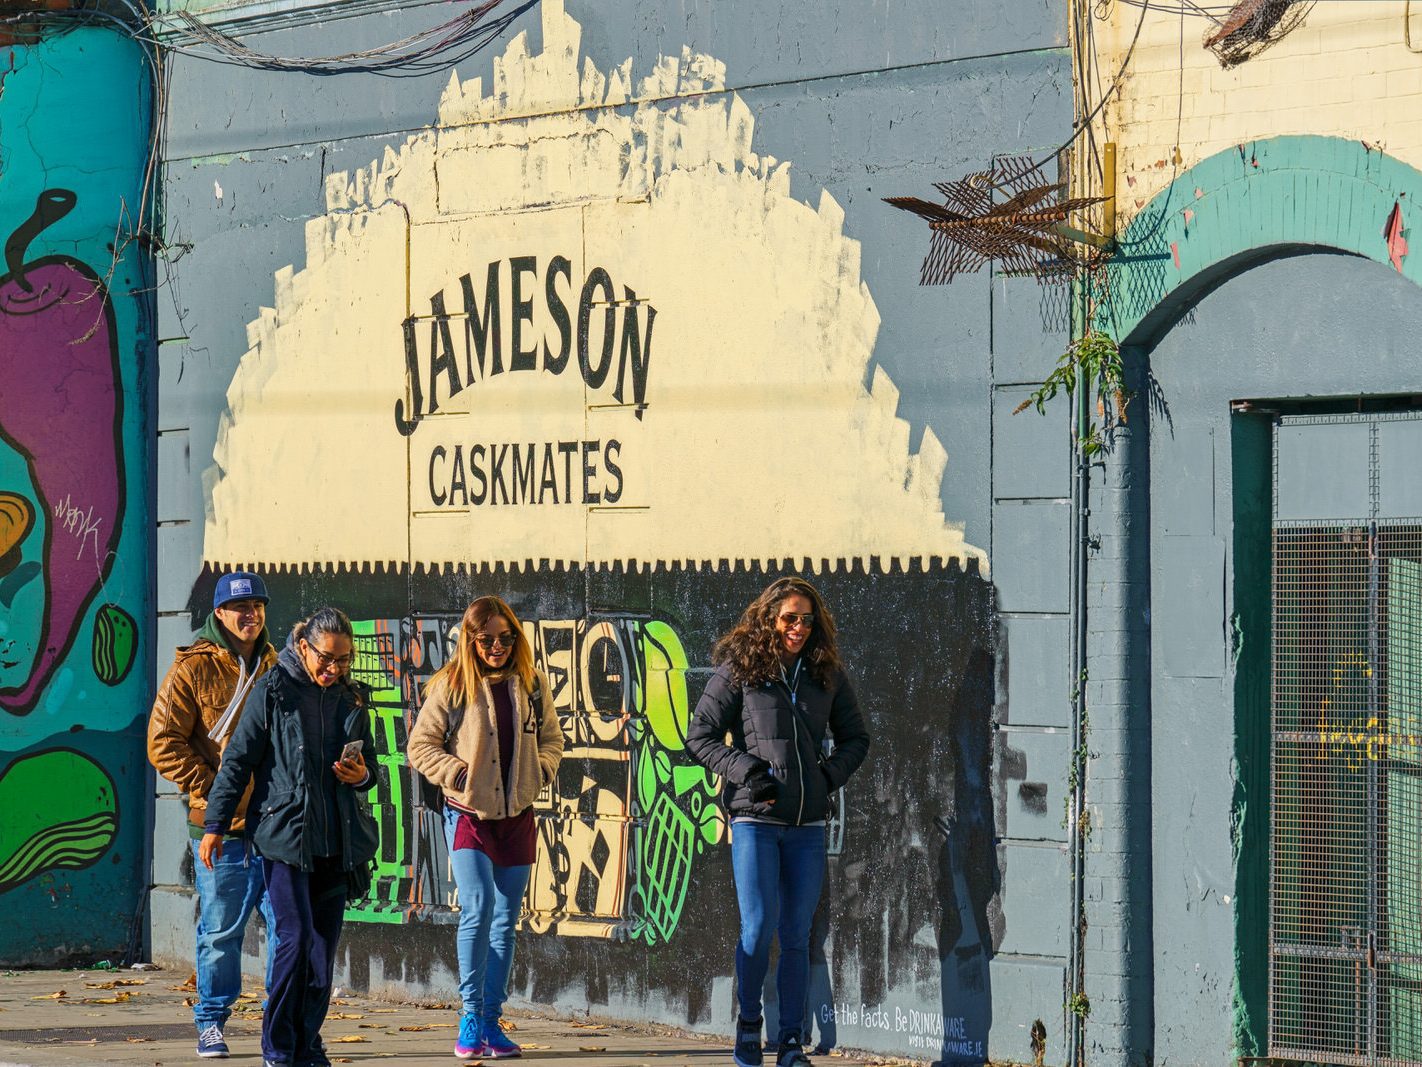 JAMESON CASKMATES THE NEW CONCEPT [COMMERCIAL STREET ART ON CHANCERY STREET]-227390-1